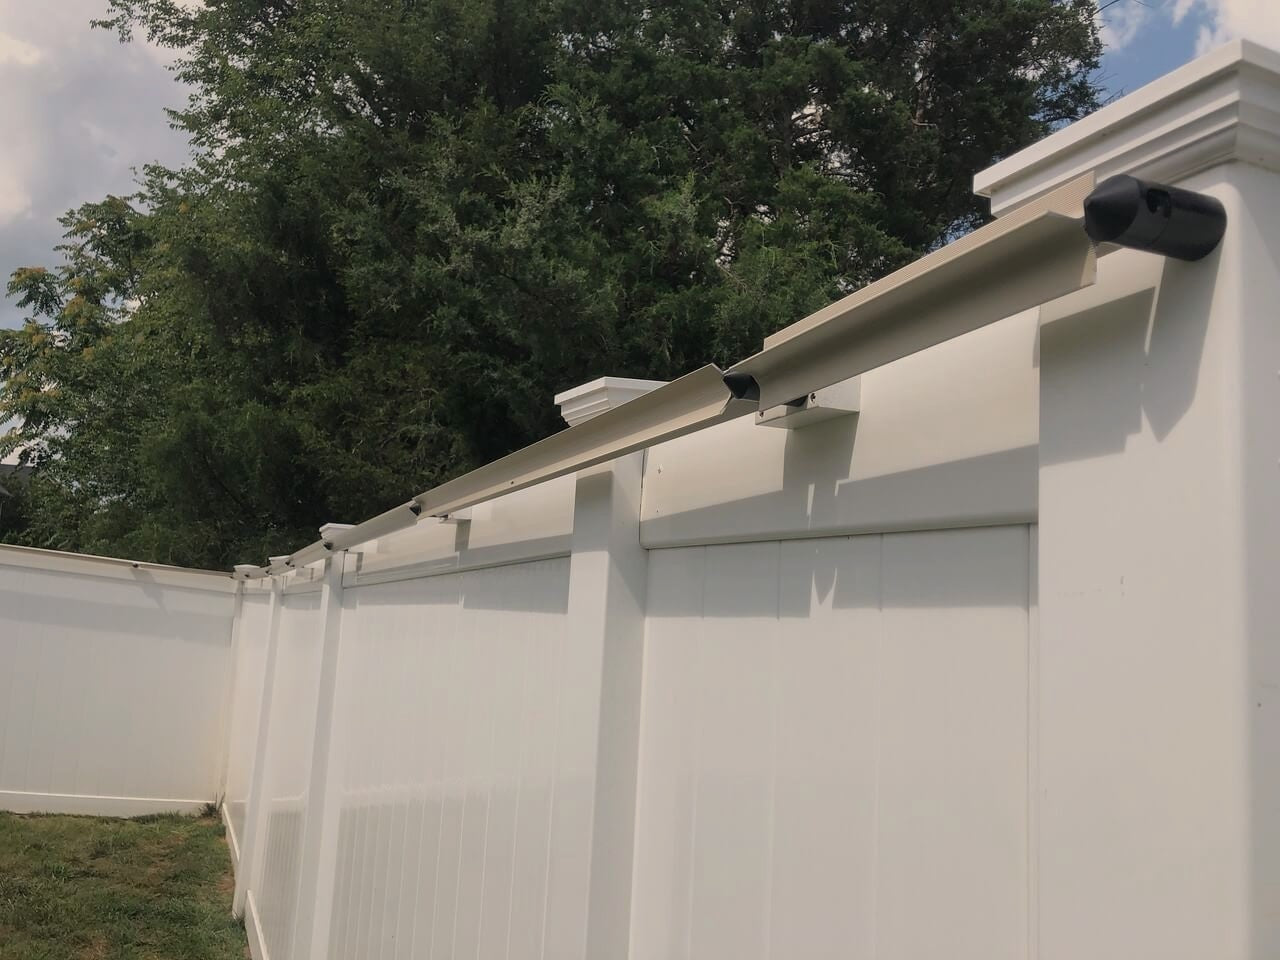 Cat-proof fence paddle kits for Vinyl fence by Oscillot. Simply install the Oscillot kit on top of your existing fence and watch it roll.